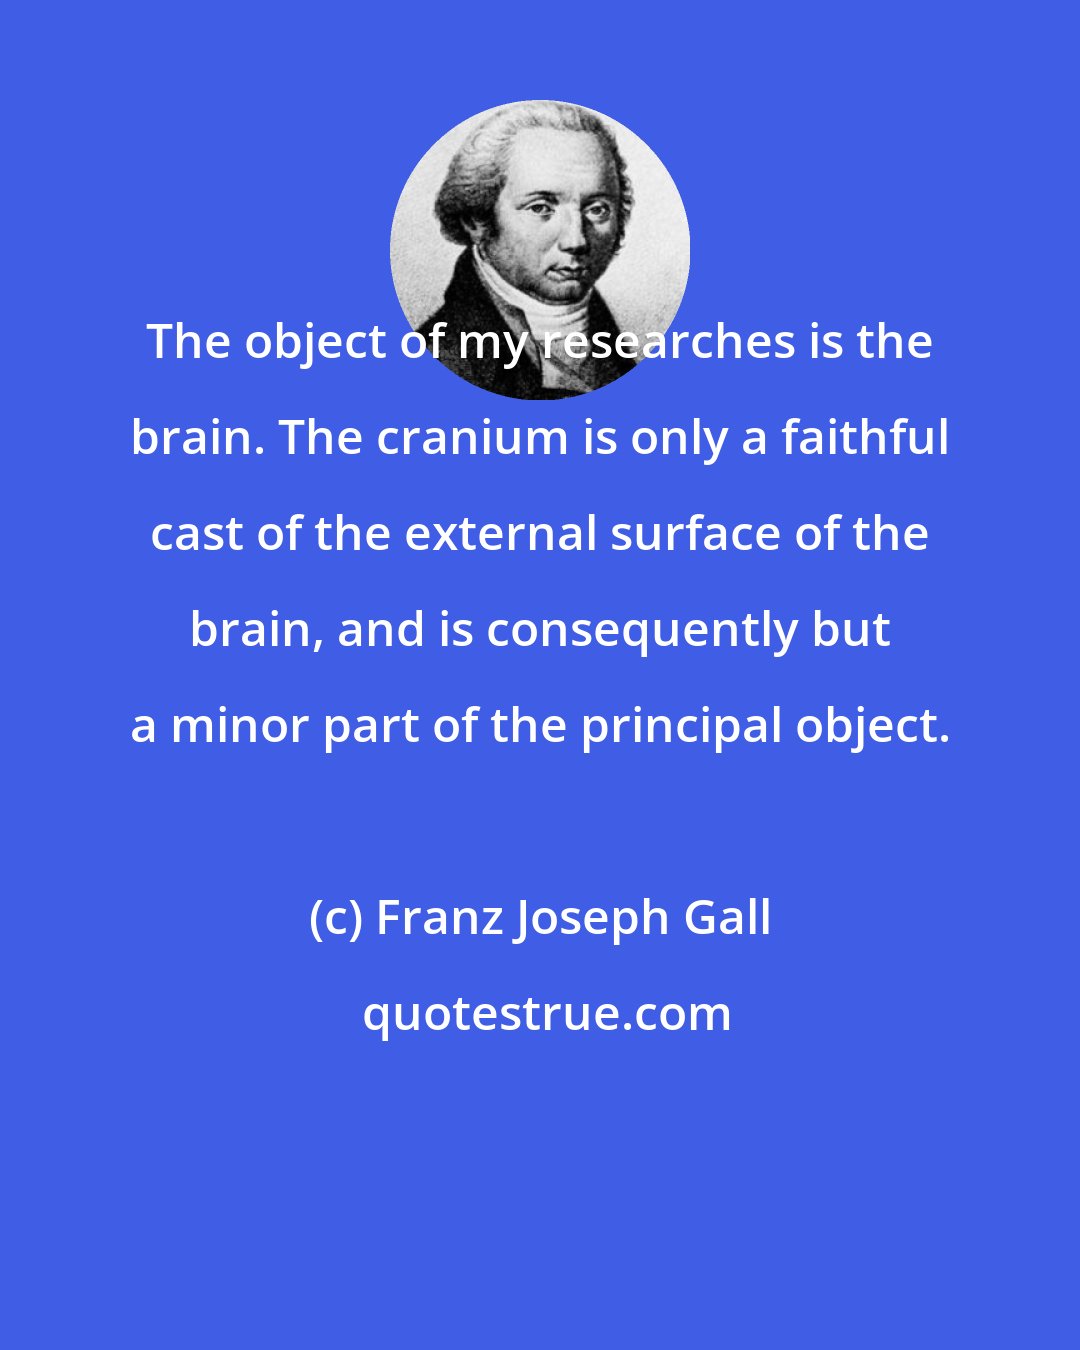 Franz Joseph Gall: The object of my researches is the brain. The cranium is only a faithful cast of the external surface of the brain, and is consequently but a minor part of the principal object.